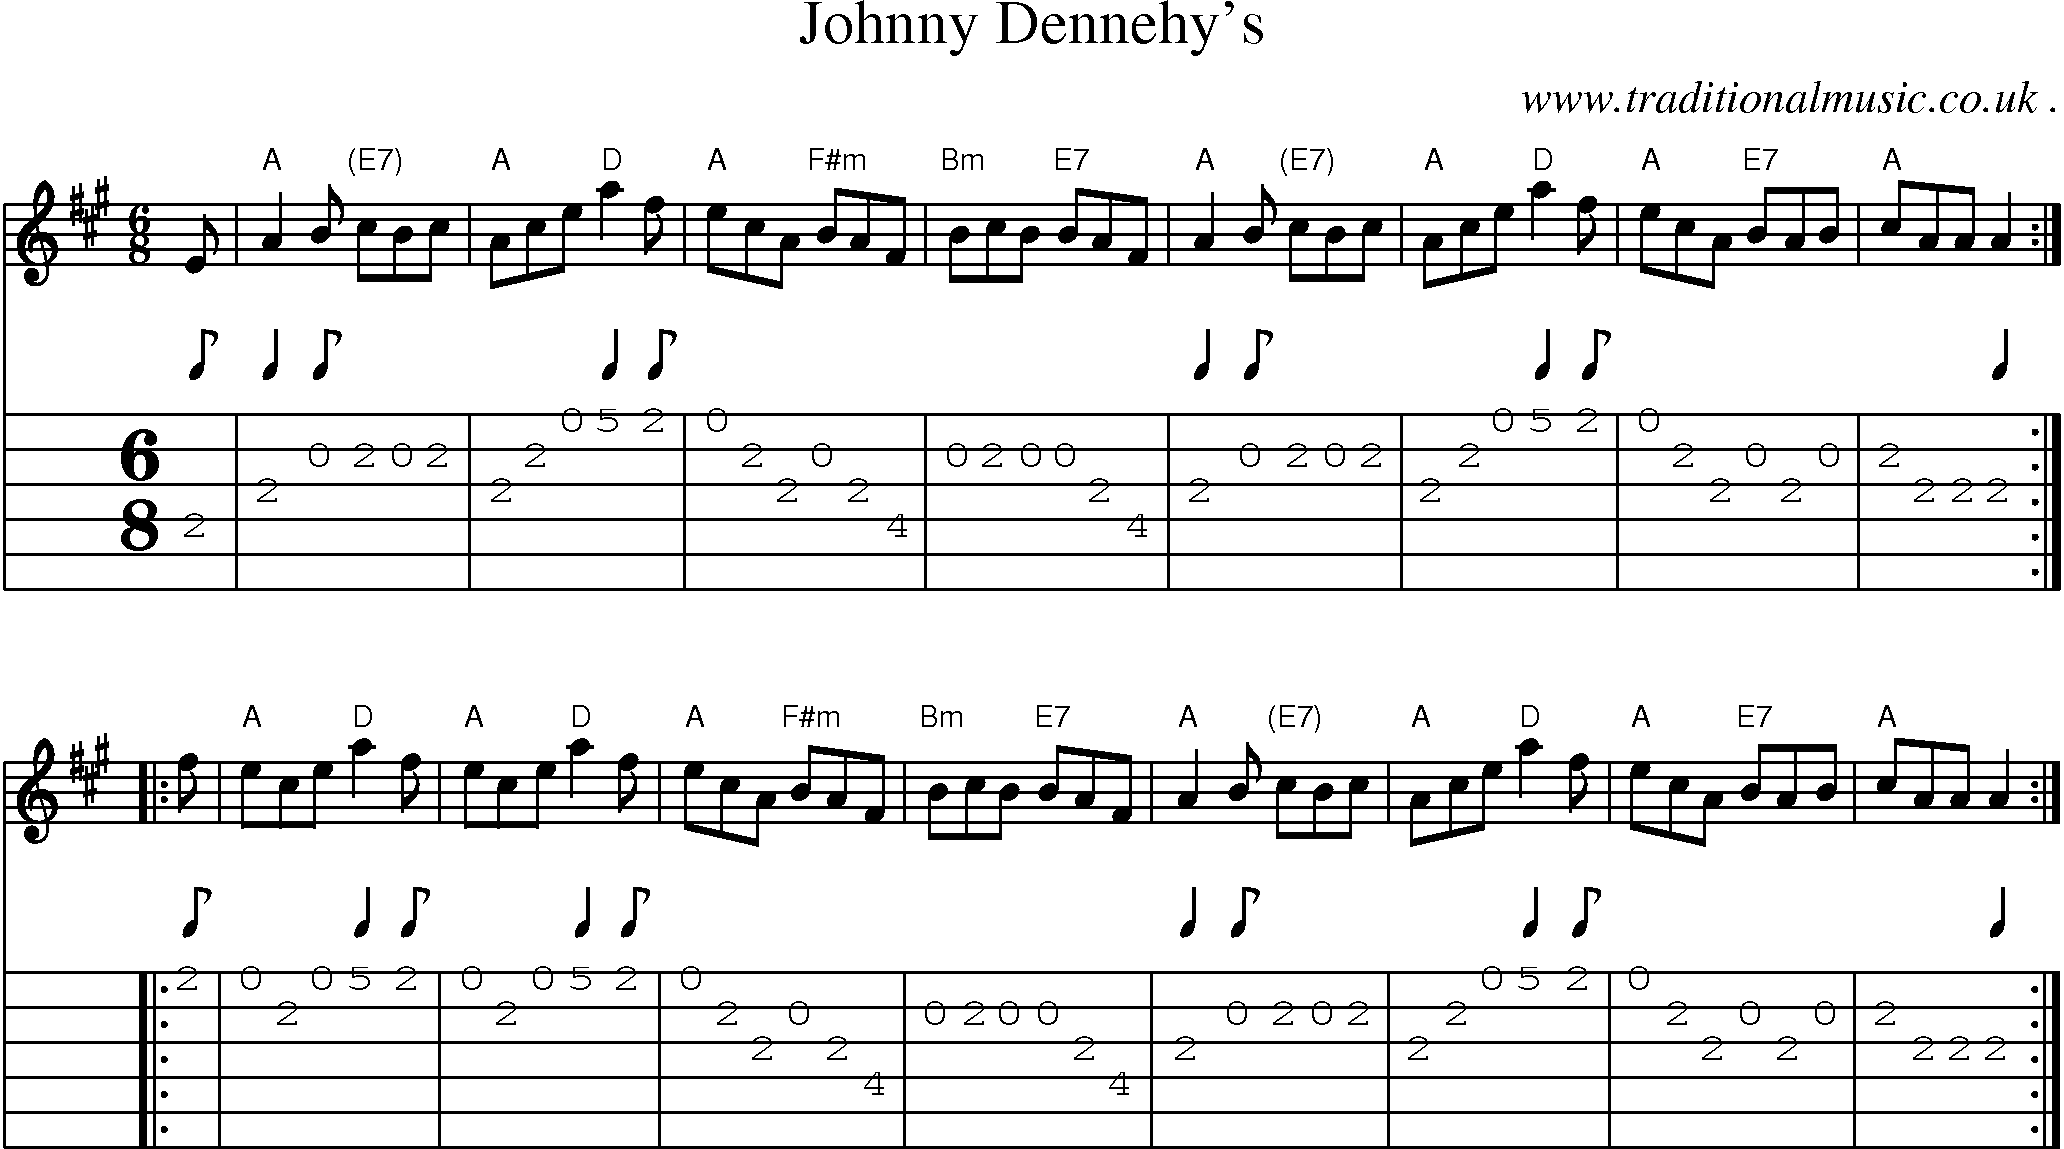 Sheet-music  score, Chords and Guitar Tabs for Johnny Dennehys